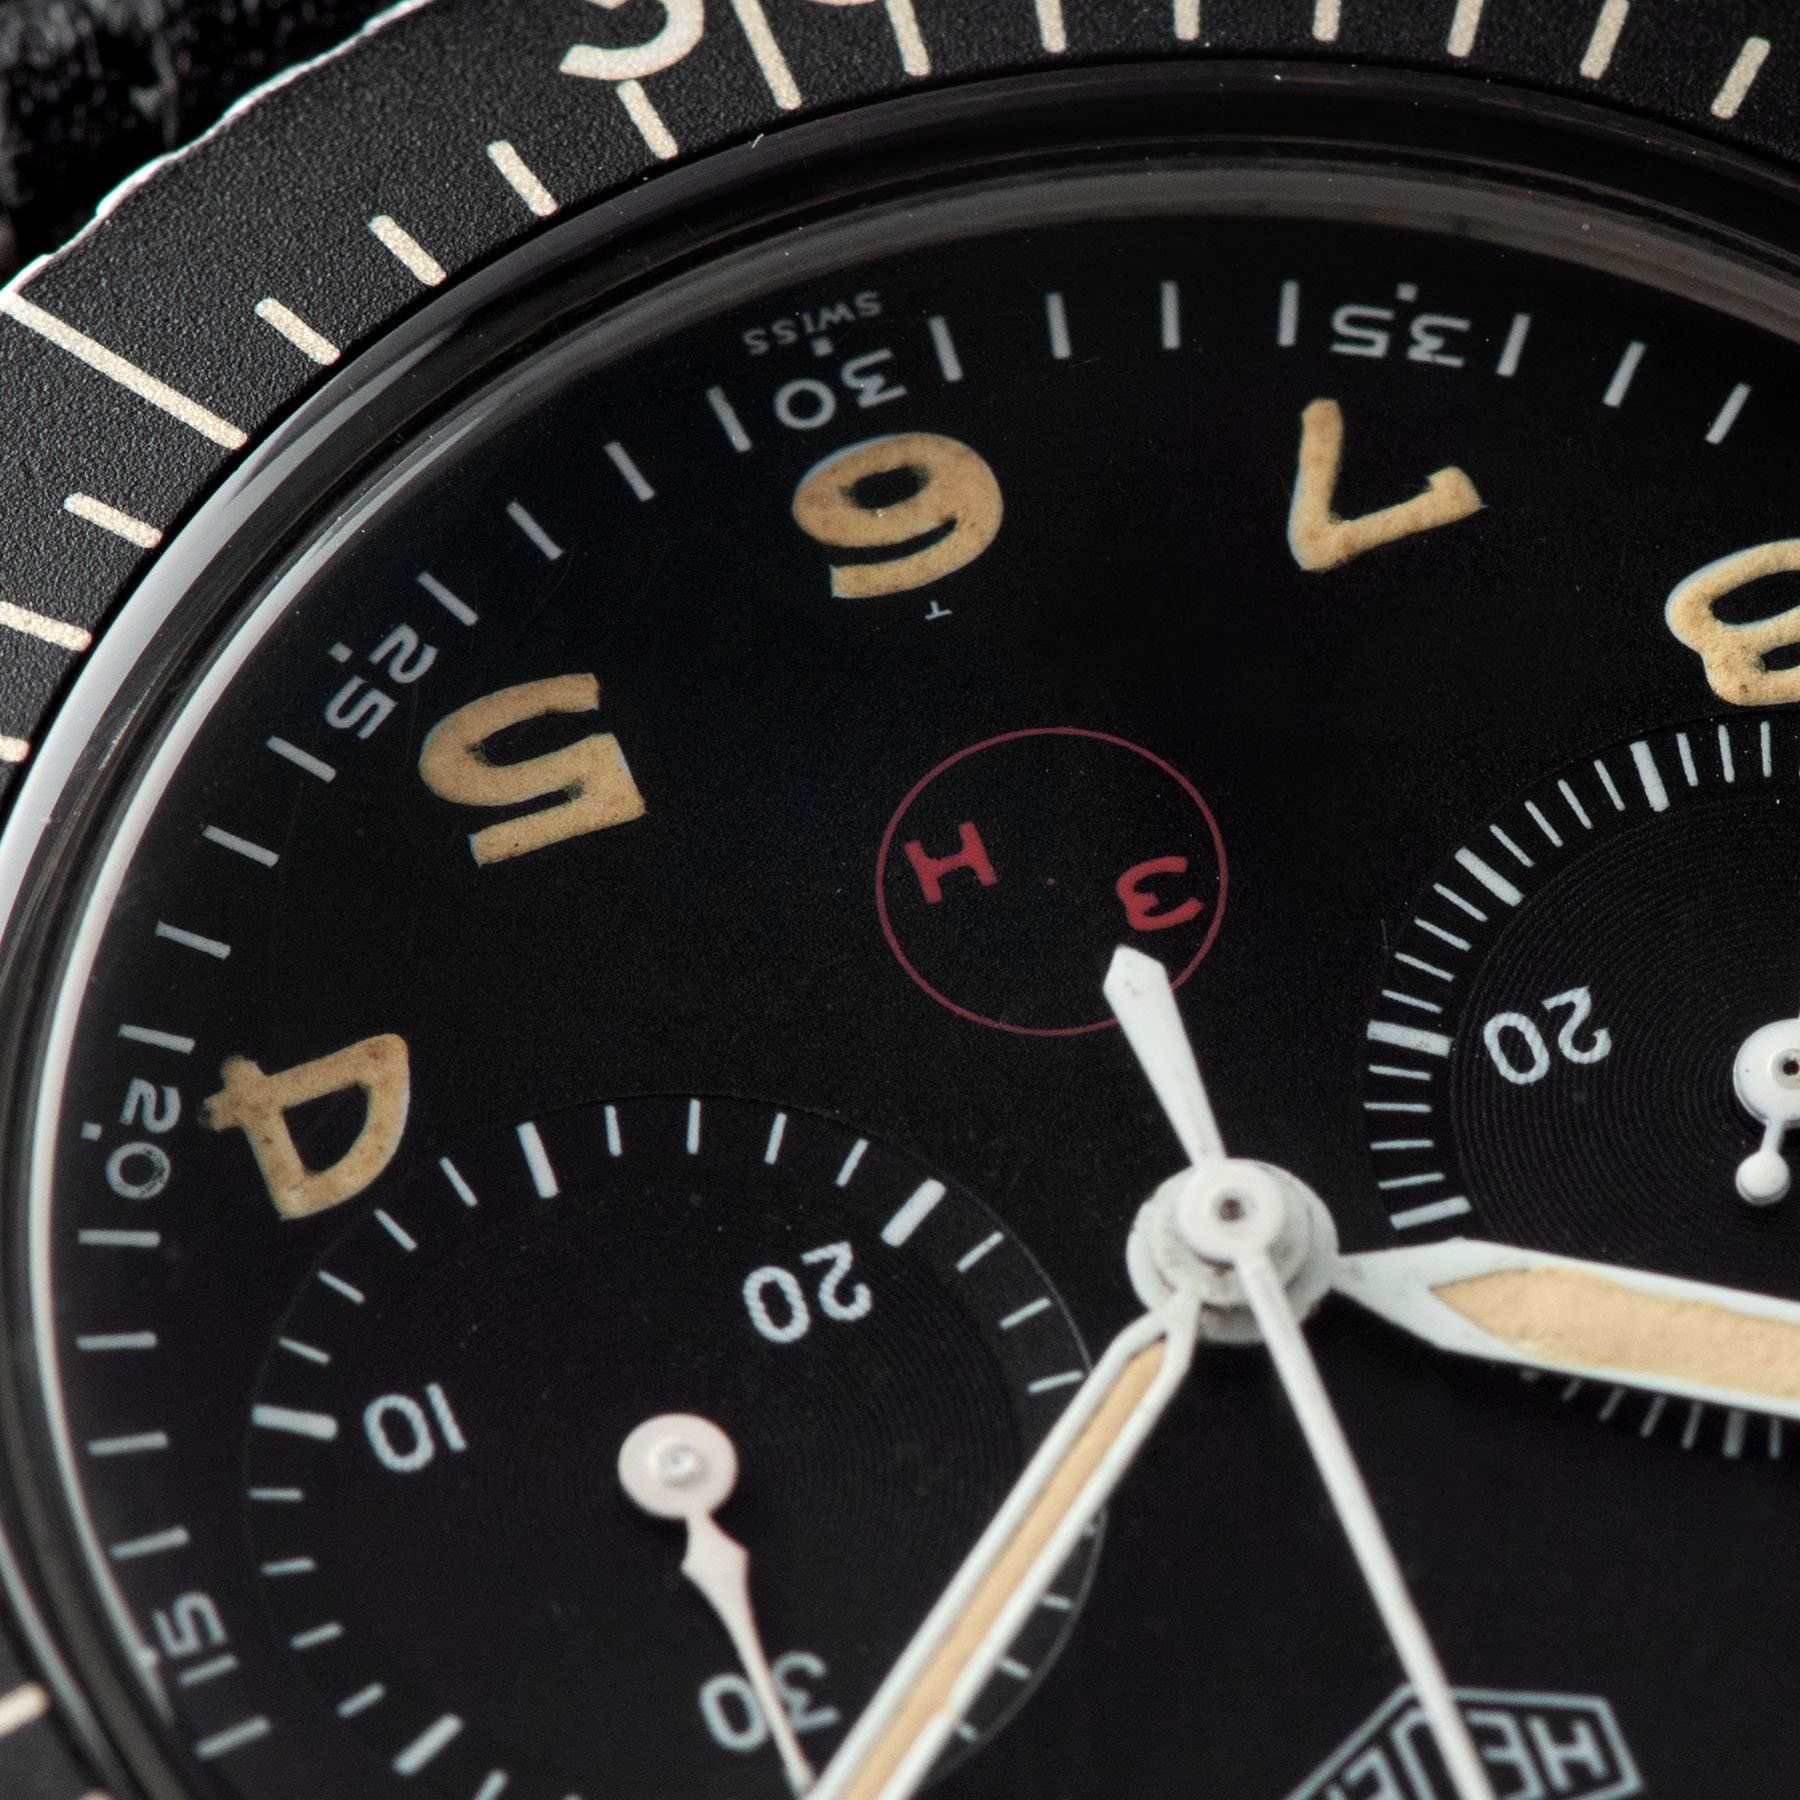 Heuer Chronograph German Issued Flyback 1550SG